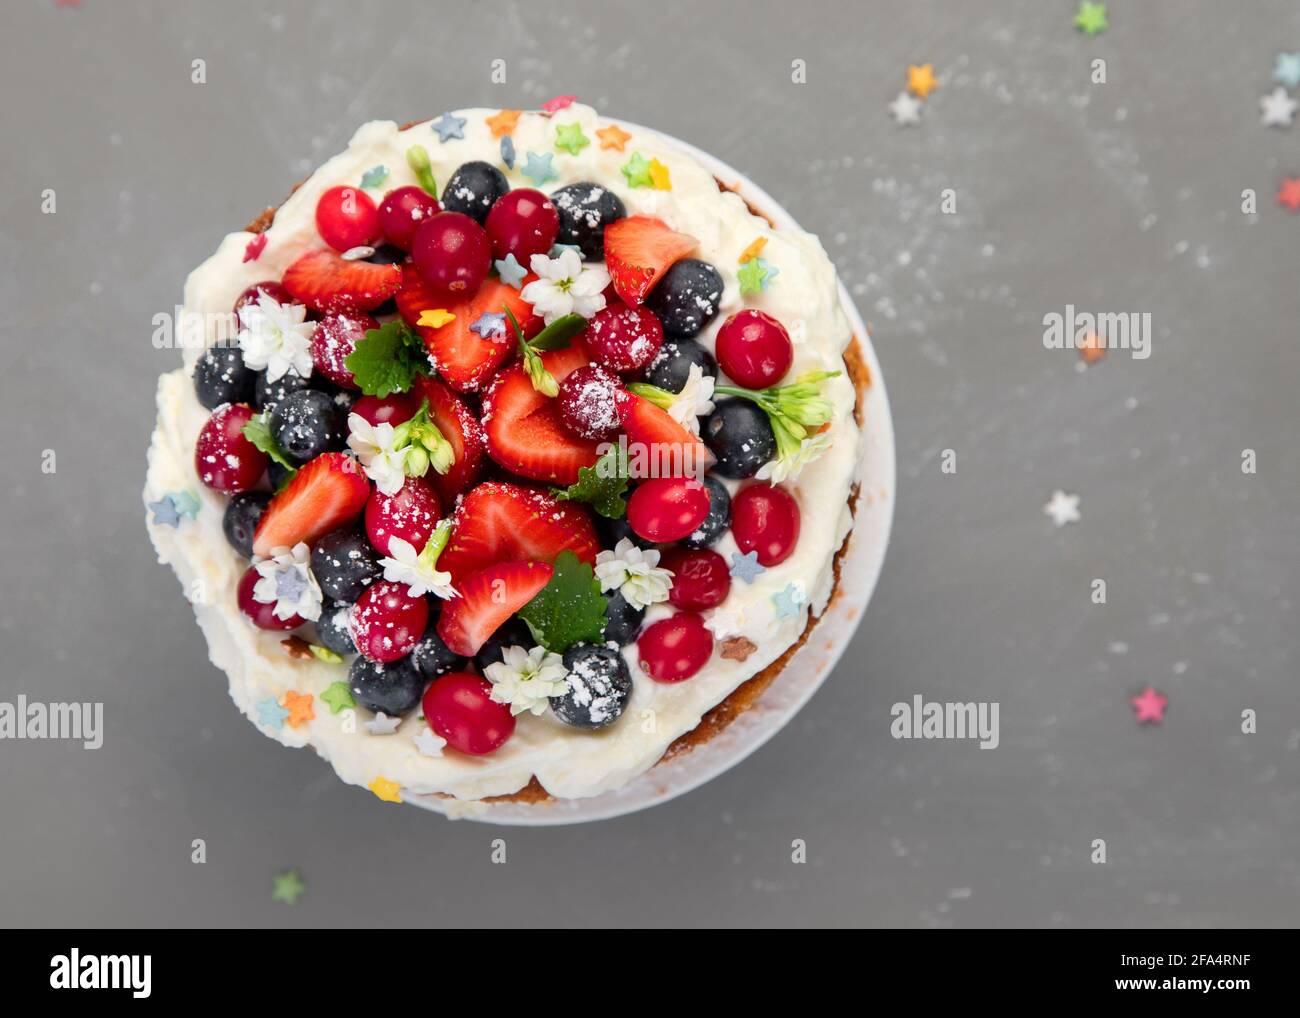 Delicious homemade cake with fresh berries and mascarpone cream on gray background. Top view, copy space Stock Photo